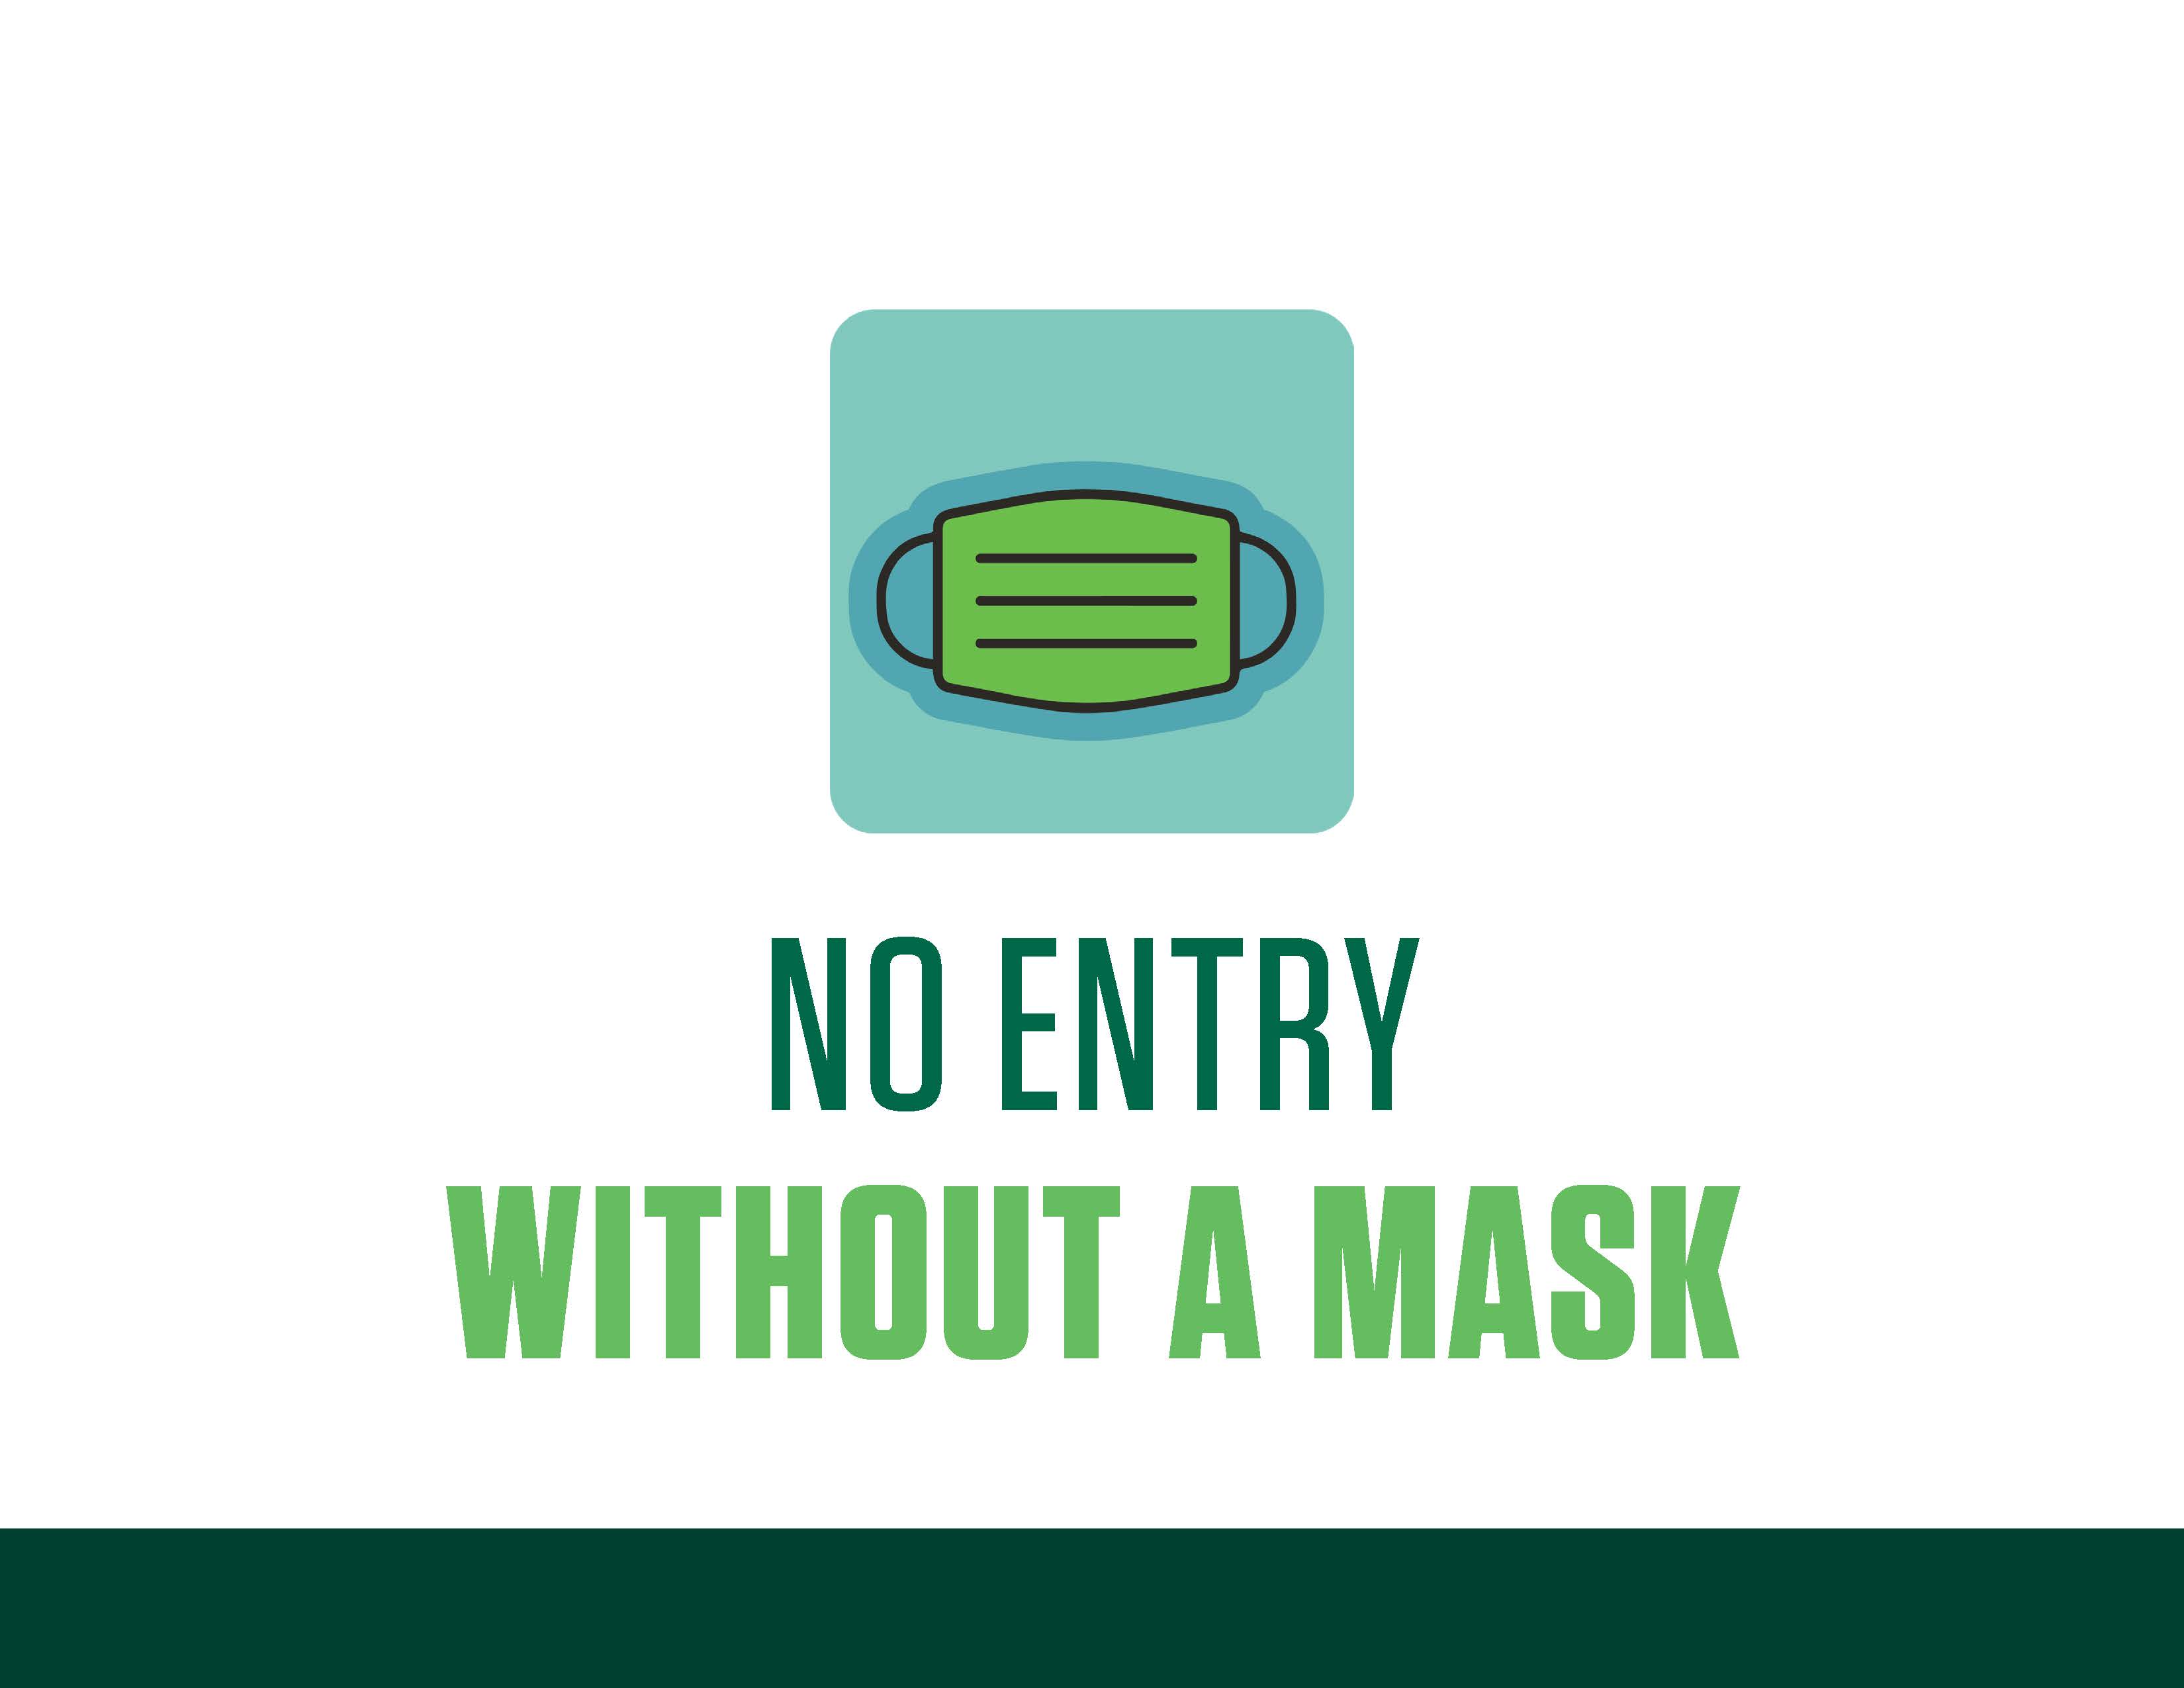 COVID sign - no entry without mask